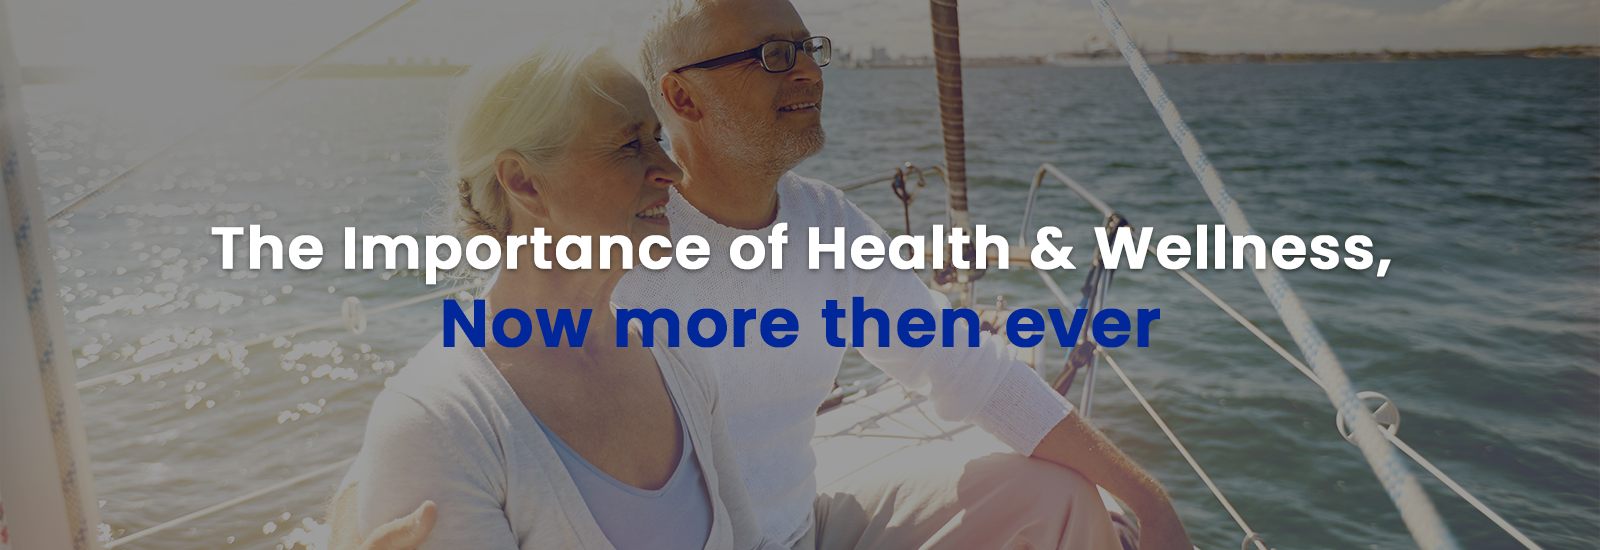 The Importance of Health & Wellness, Now More Then Ever | Banner Image